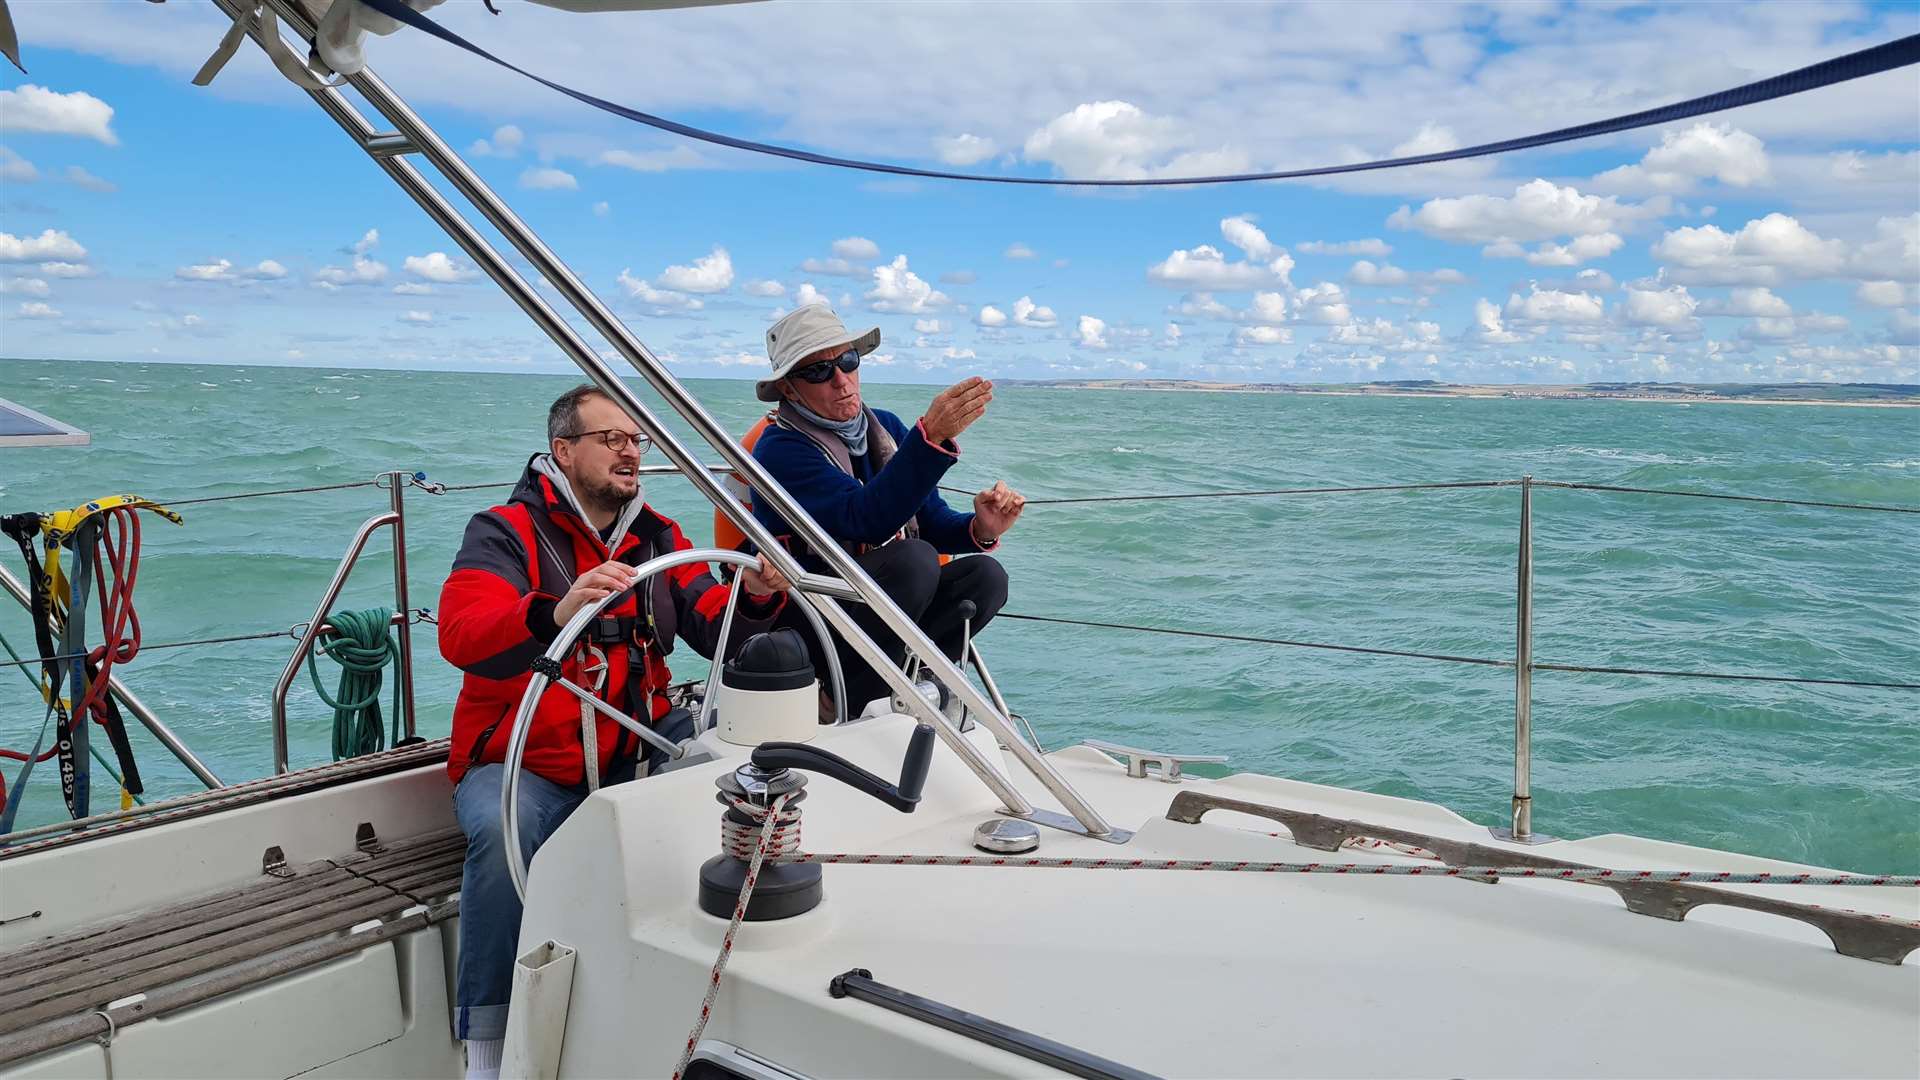 Passengers can even have a go at sailing the catamaran, under the watchful eye of the skipper